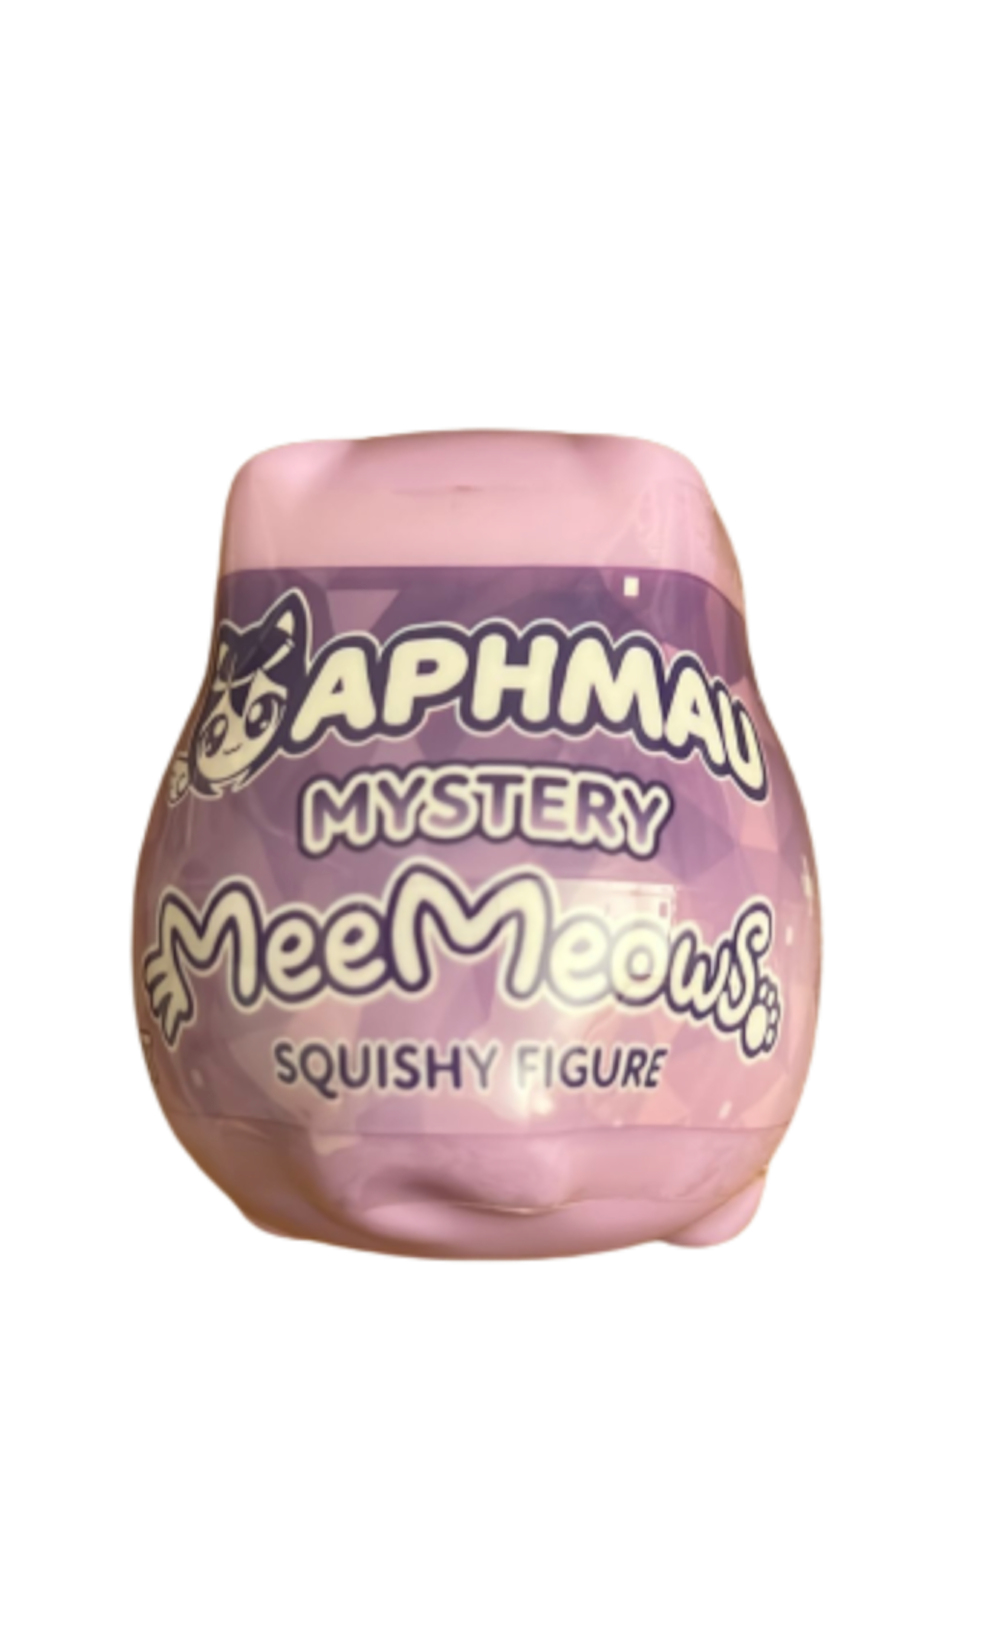 Aphmau Mystery MeeMeows Mystery Randomly Selected Squishy New With Sealed Box